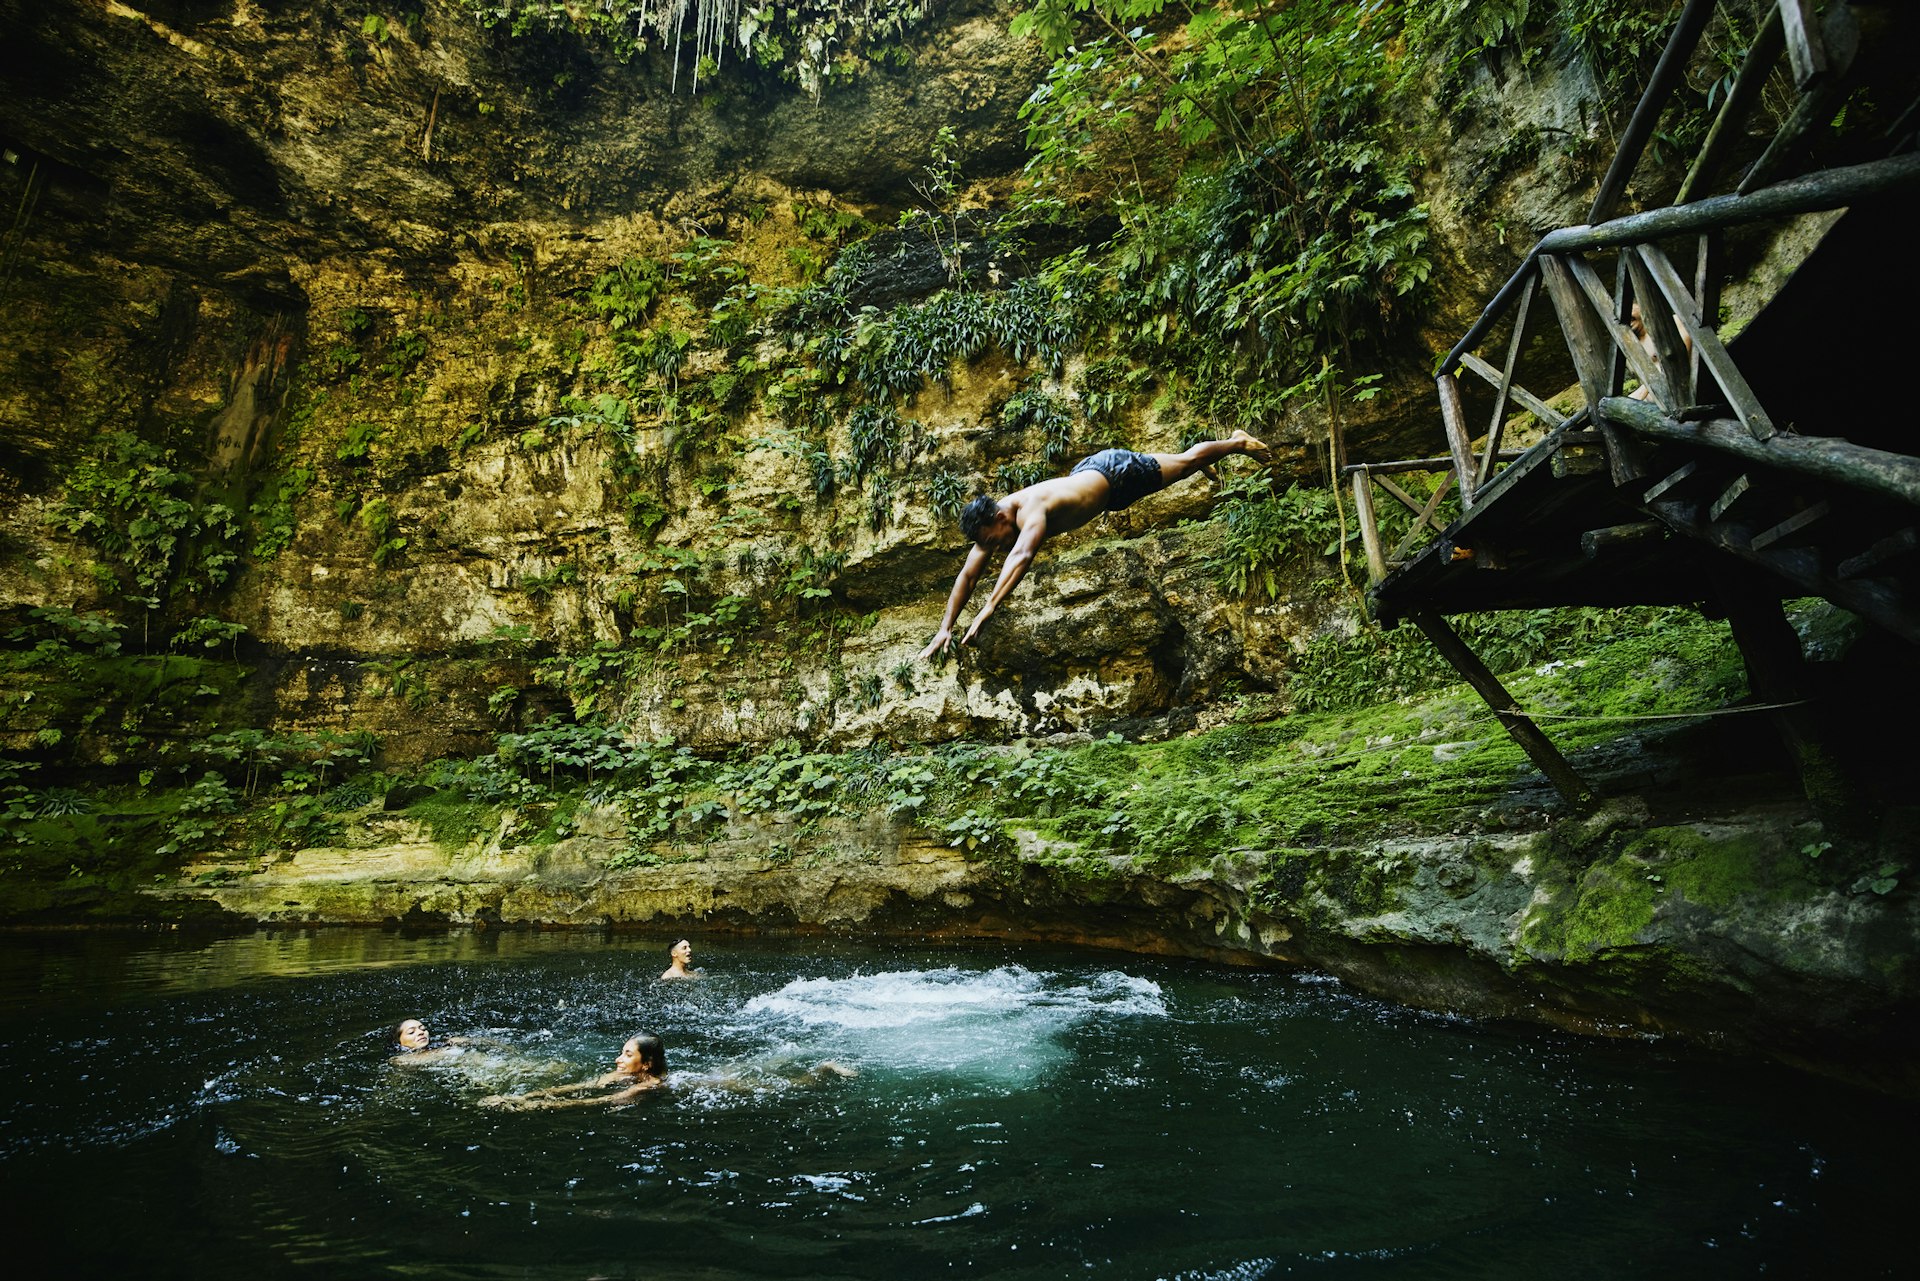 A man dives into a cenote - a sunken water hole - to join friends swimming there